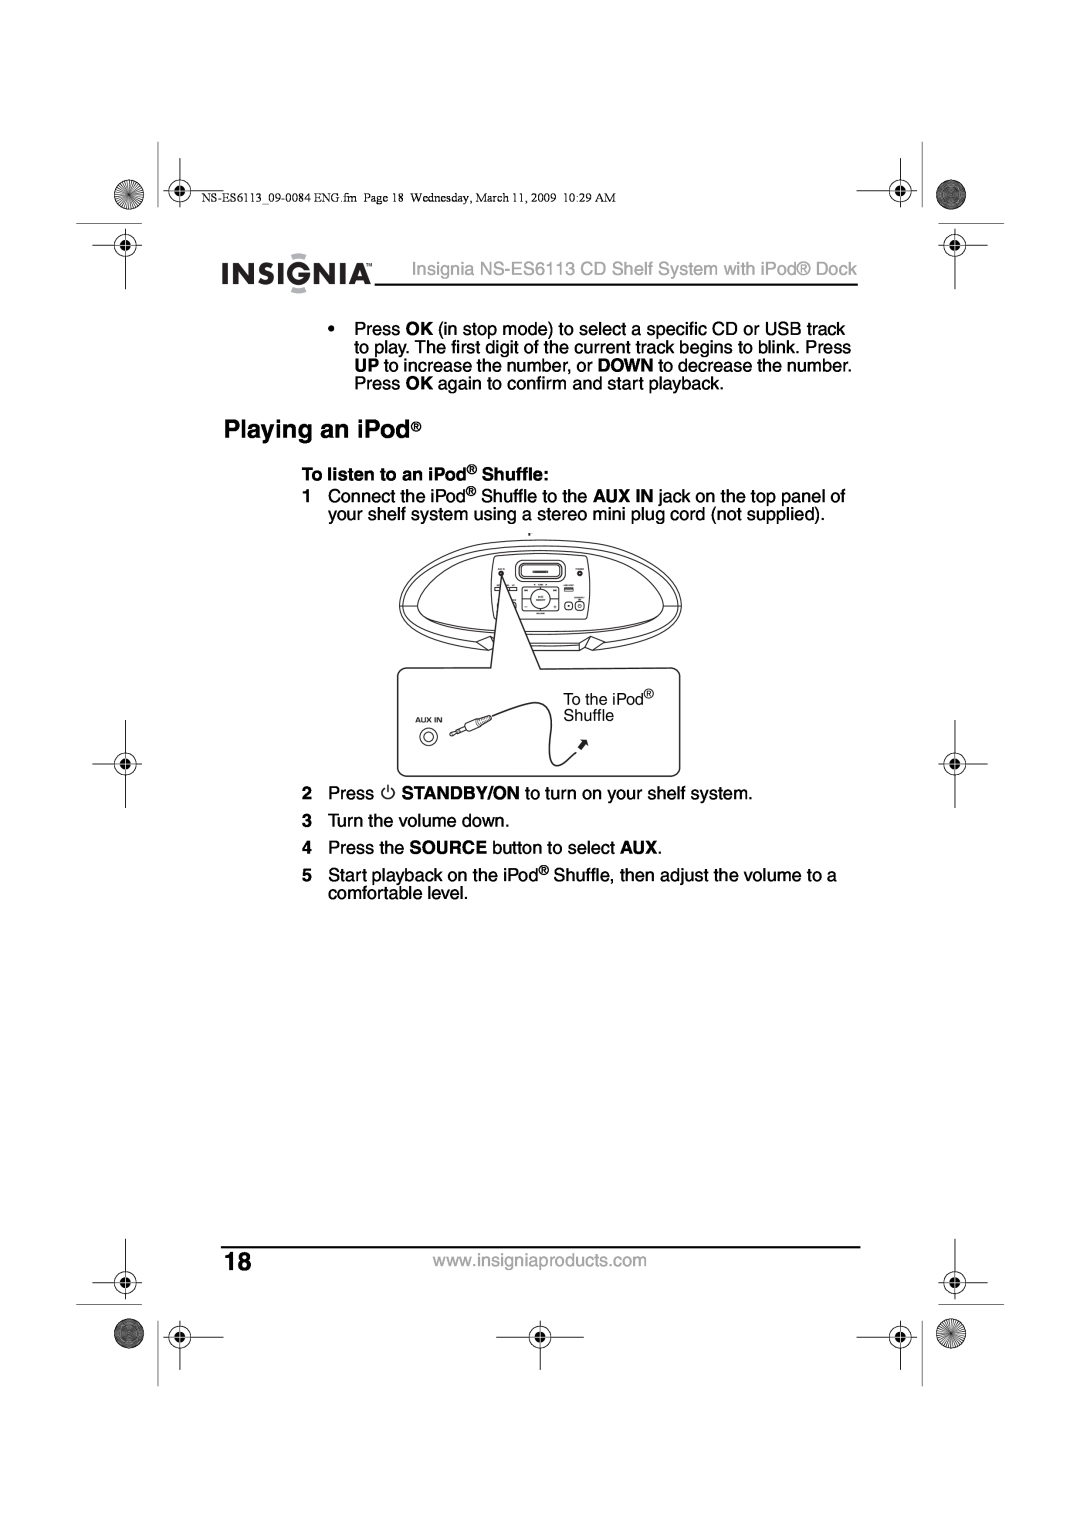 Insignia manual Playing an iPod, To listen to an iPod Shuffle, Insignia NS-ES6113CD Shelf System with iPod Dock 